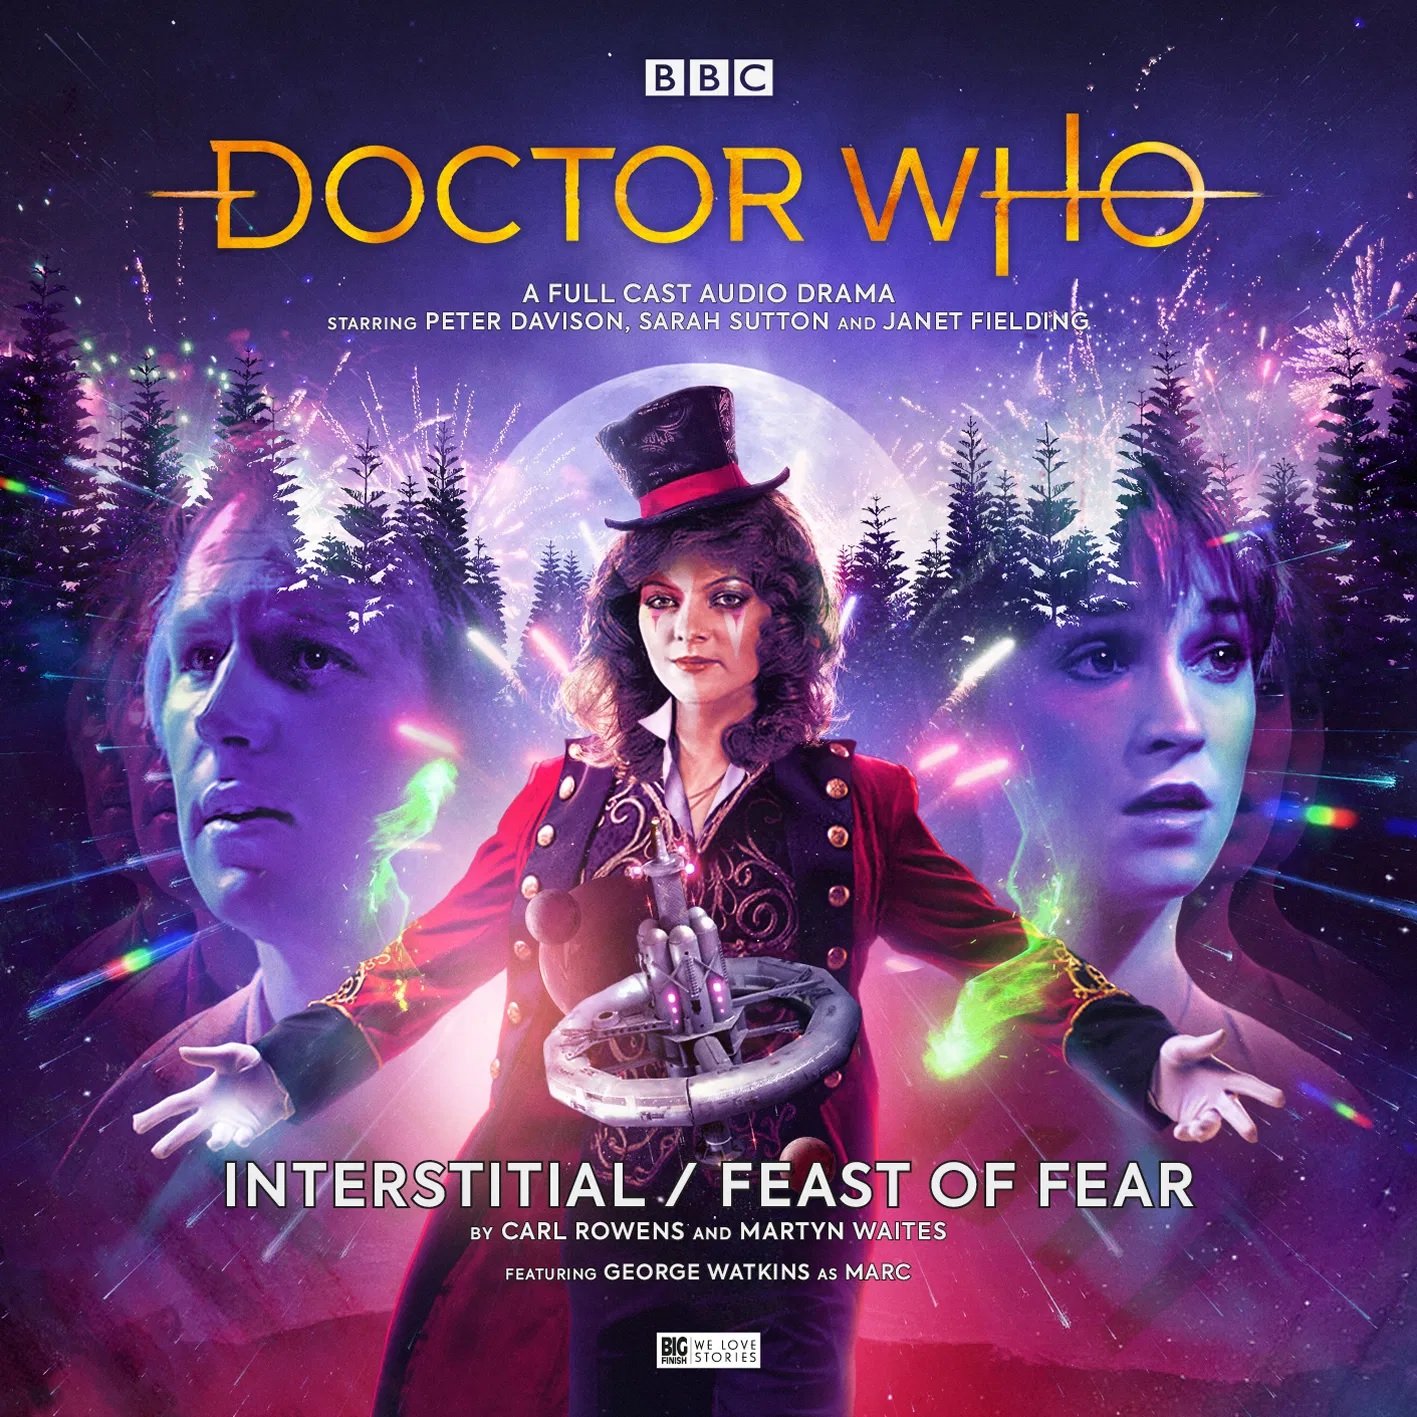 Reviewed: Big Finish’s Interstitial/ Feast of Fear